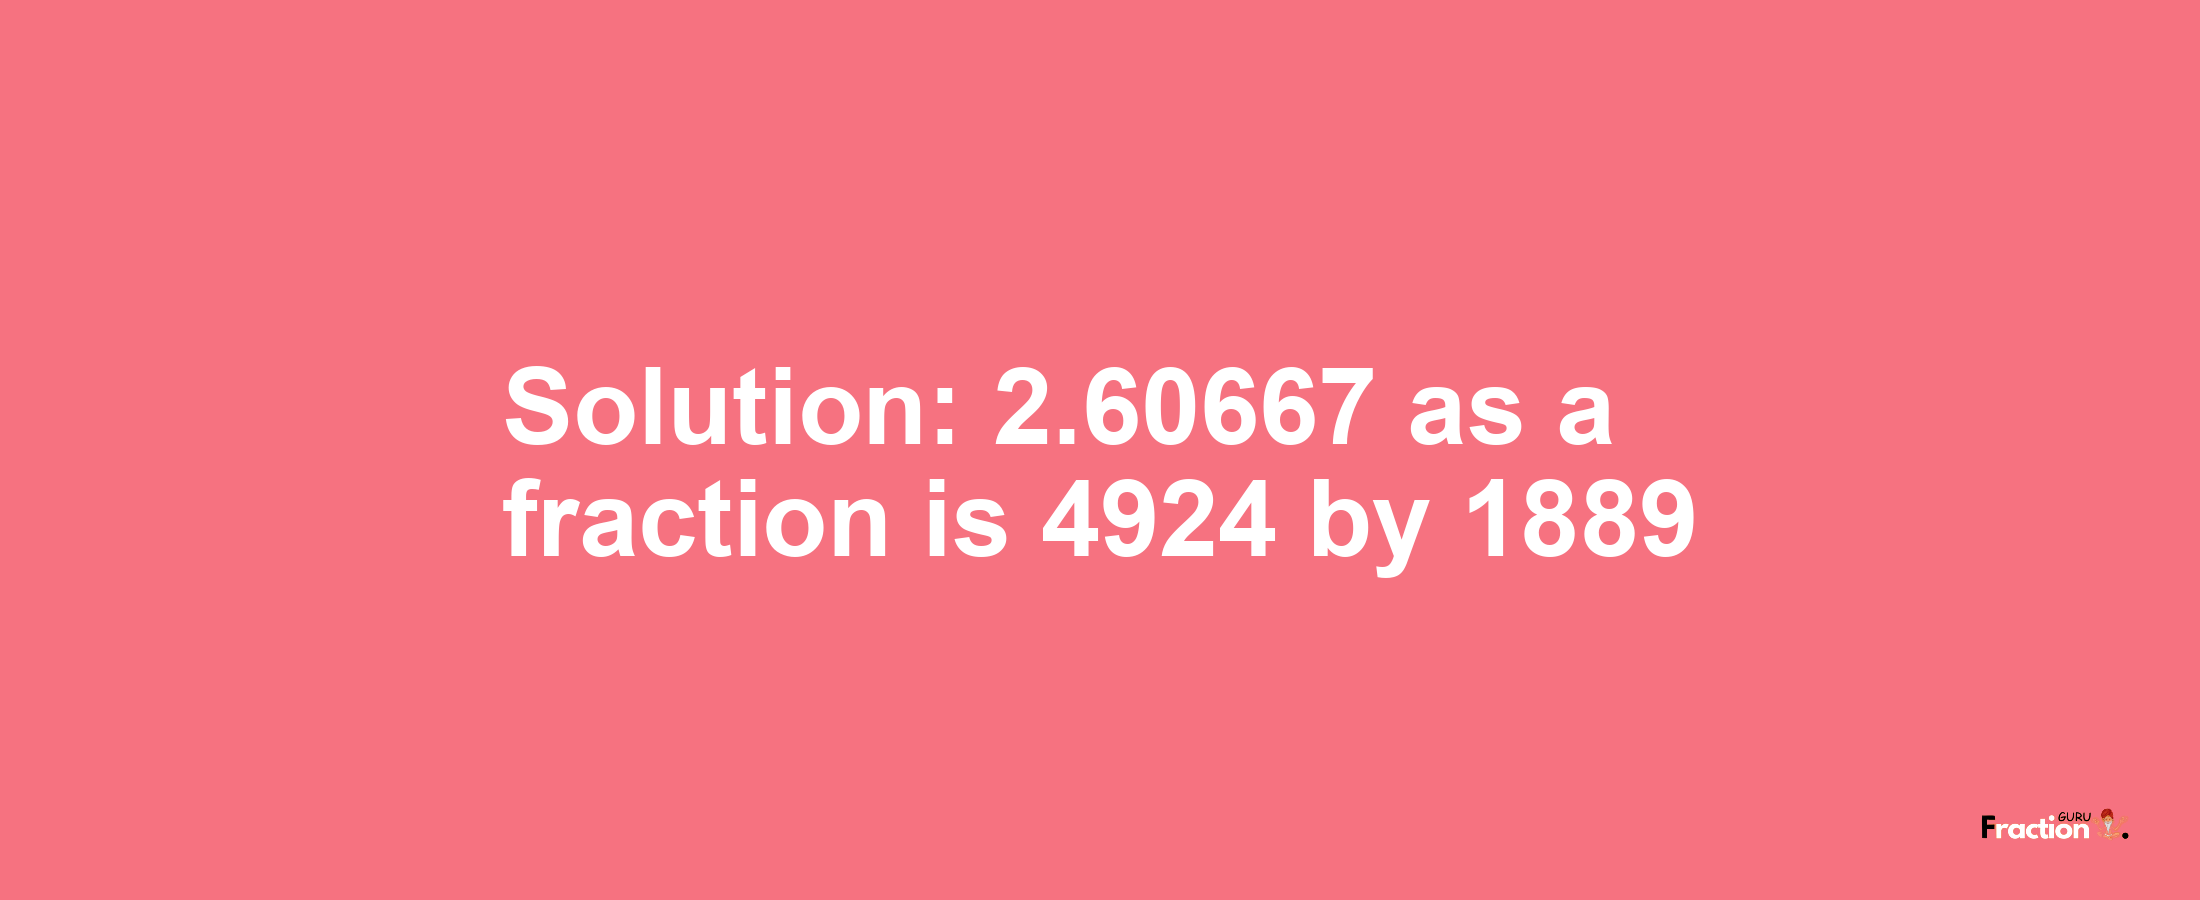 Solution:2.60667 as a fraction is 4924/1889